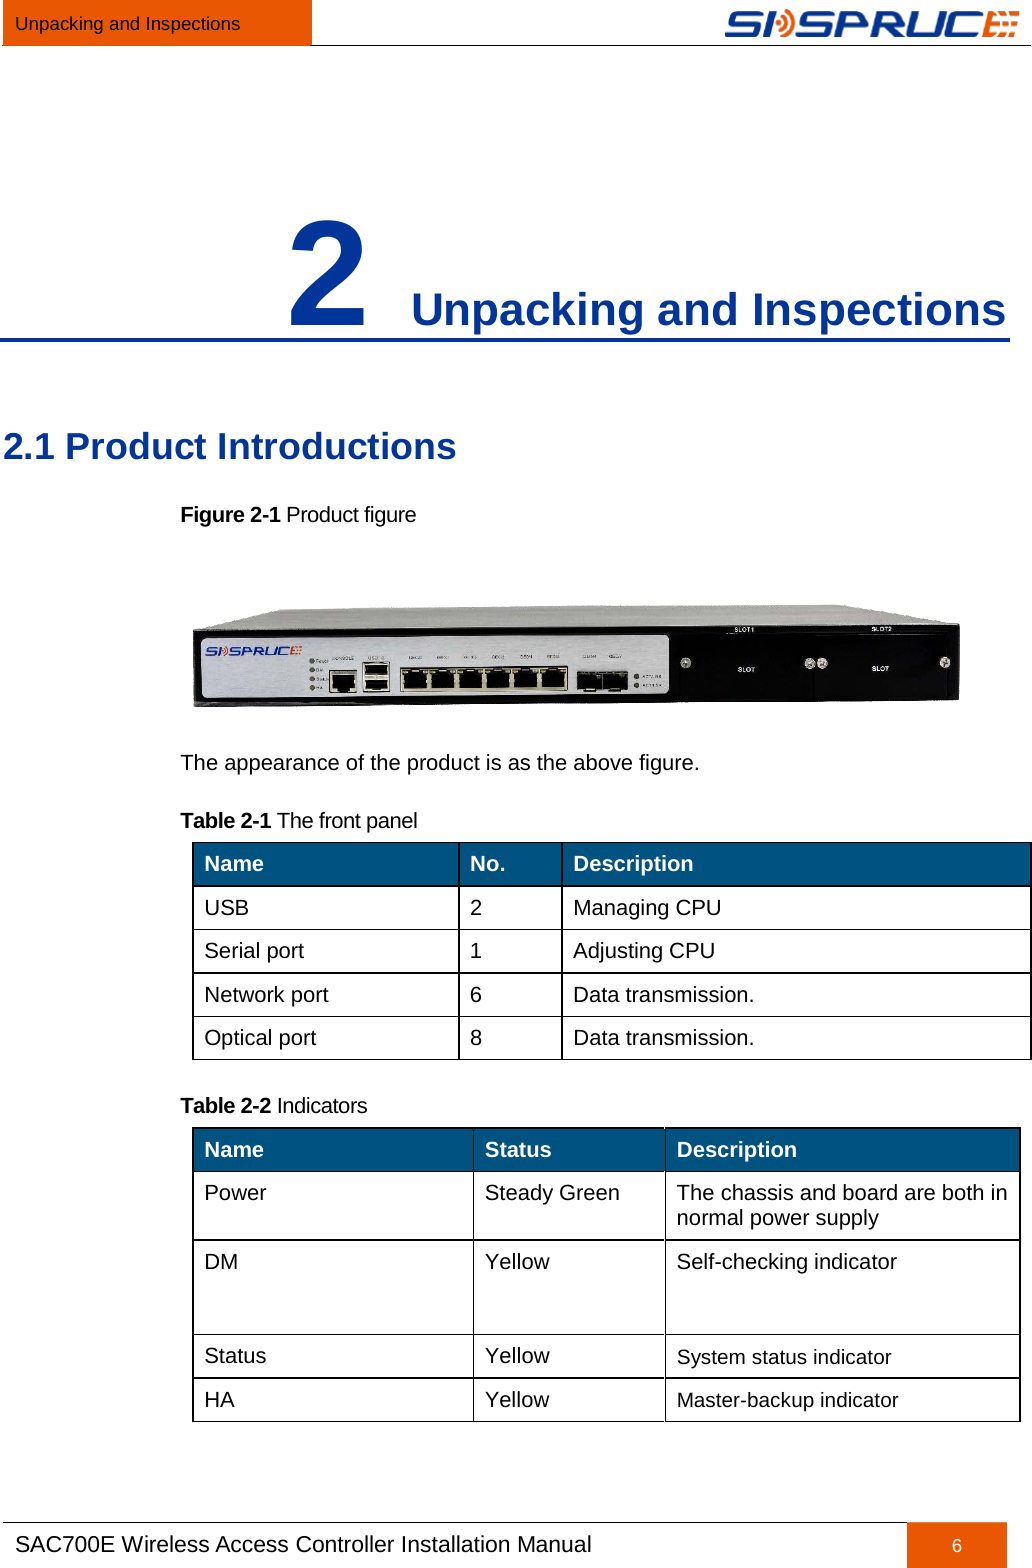 Unpacking and Inspections   SAC700E Wireless Access Controller Installation Manual 6  2 Unpacking and Inspections 2.1 Product Introductions Figure 2-1 Product figure  The appearance of the product is as the above figure. Table 2-1 The front panel Name No. Description USB  2  Managing CPU Serial port  1  Adjusting CPU Network port  6  Data transmission. Optical port  8  Data transmission. Table 2-2 Indicators Name Status Description Power Steady Green The chassis and board are both in normal power supply DM Yellow  Self-checking indicator Status Yellow System status indicator HA Yellow  Master-backup indicator 